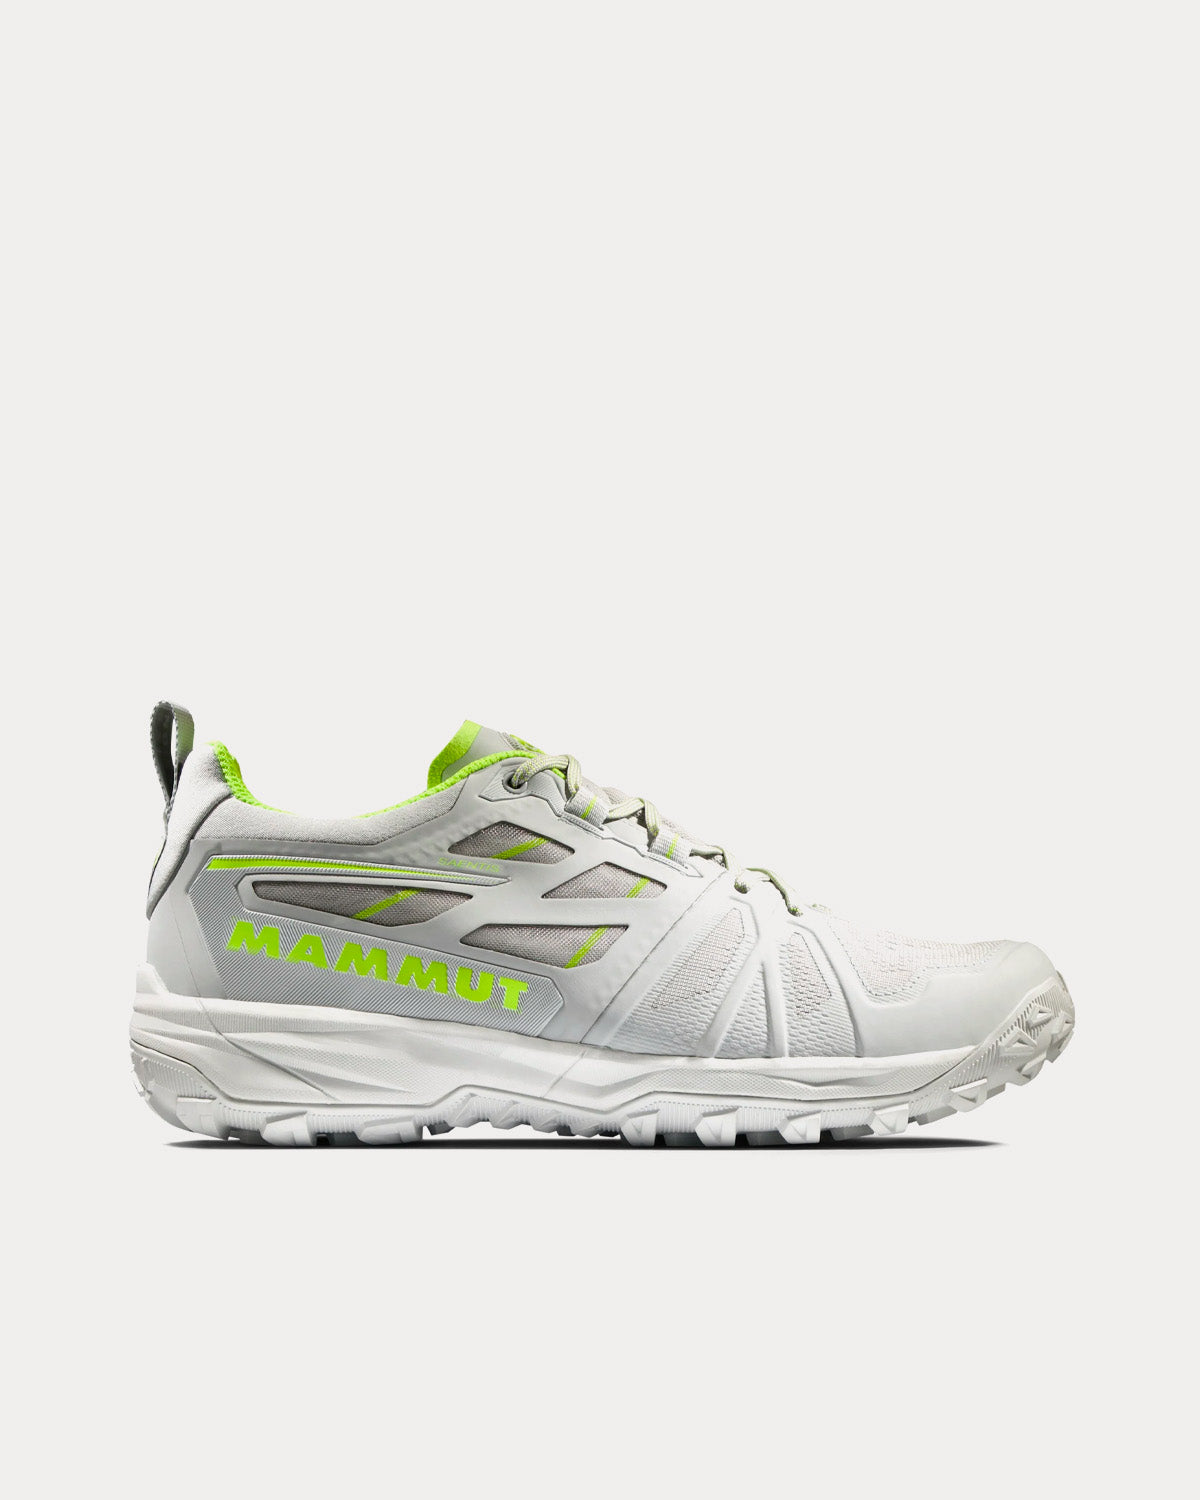 Mammut - Saentis Low GTX  Ice Grey / High Lime Running Shoes